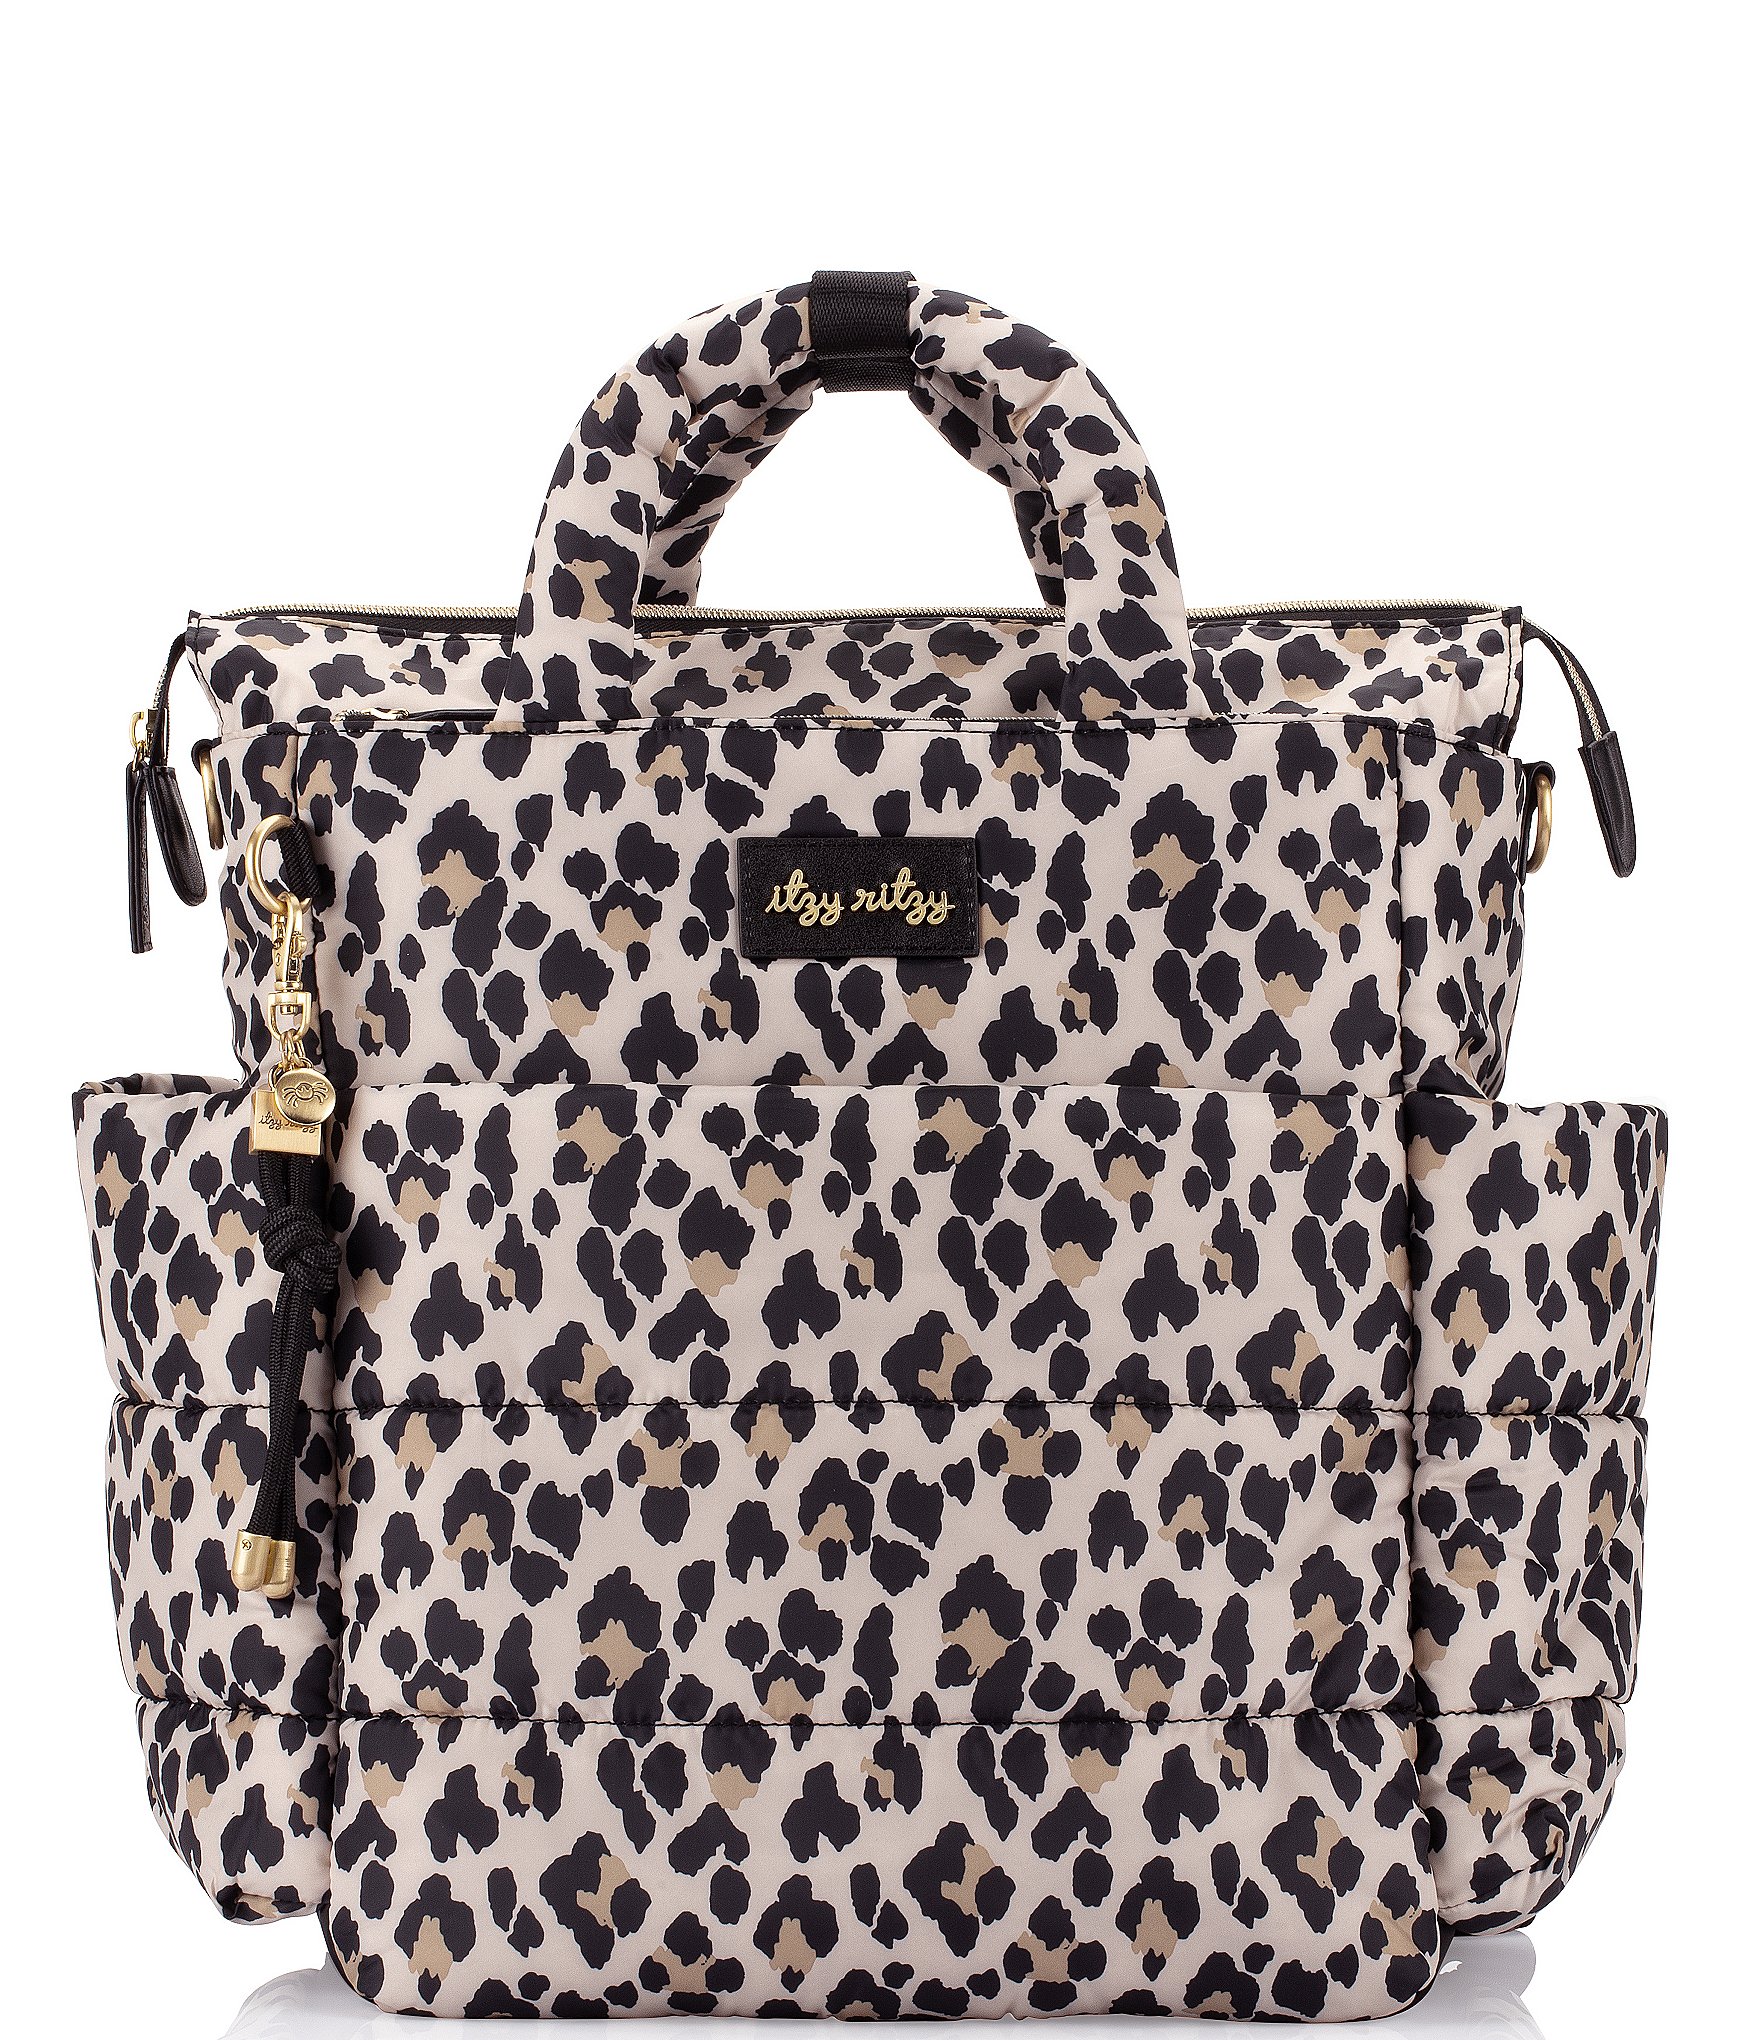 Leopard Print Diaper Bags, Baby Products & More